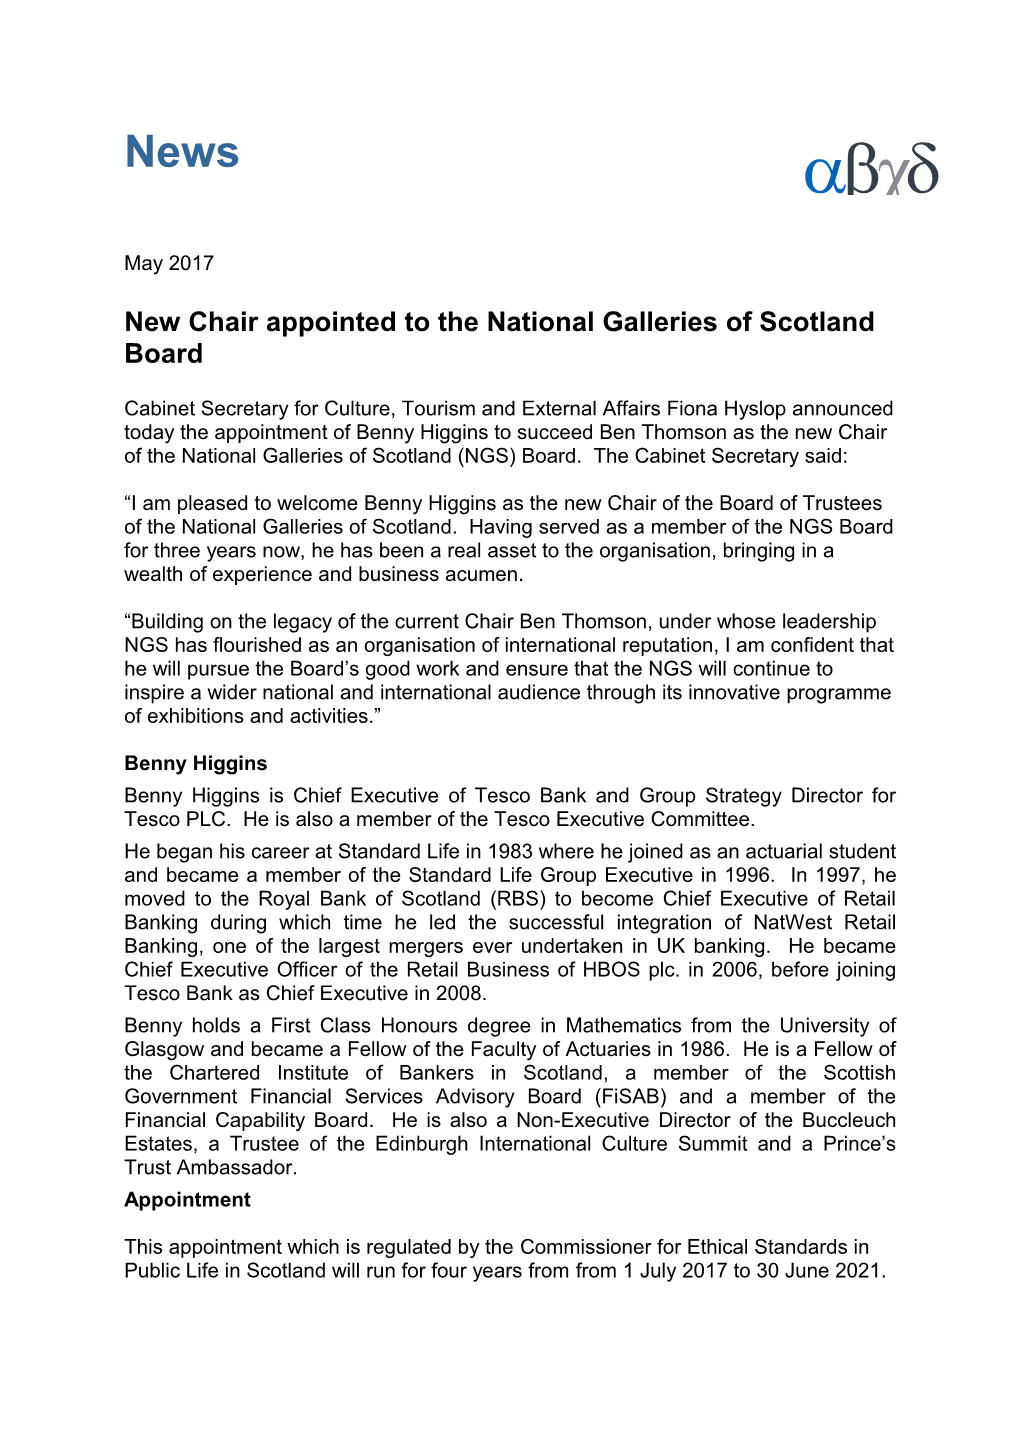 New Chair Appointed to the National Galleries of Scotland Board